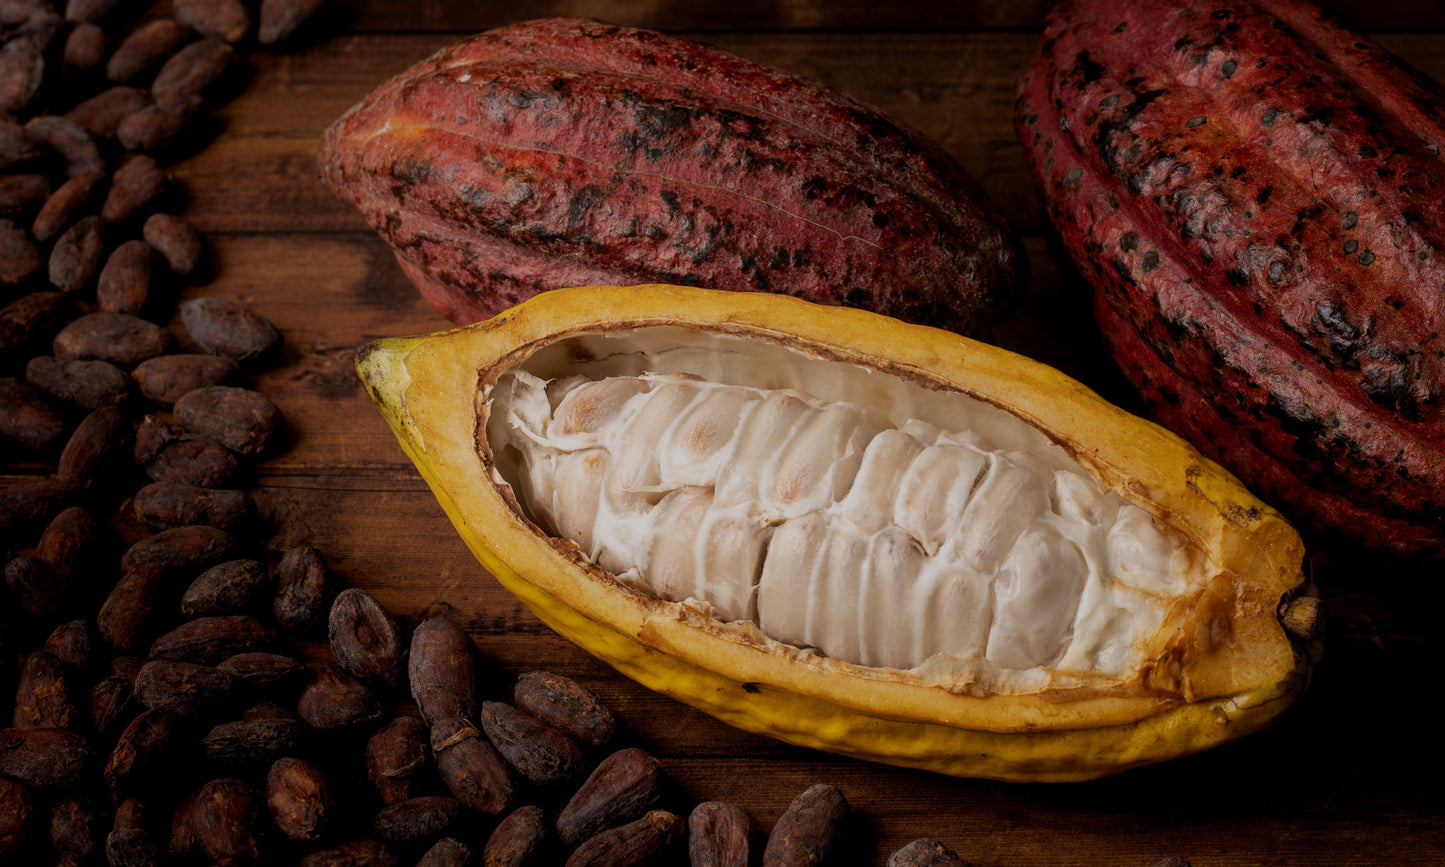 Embrace Chocolate - open cacao pods and cacao beans